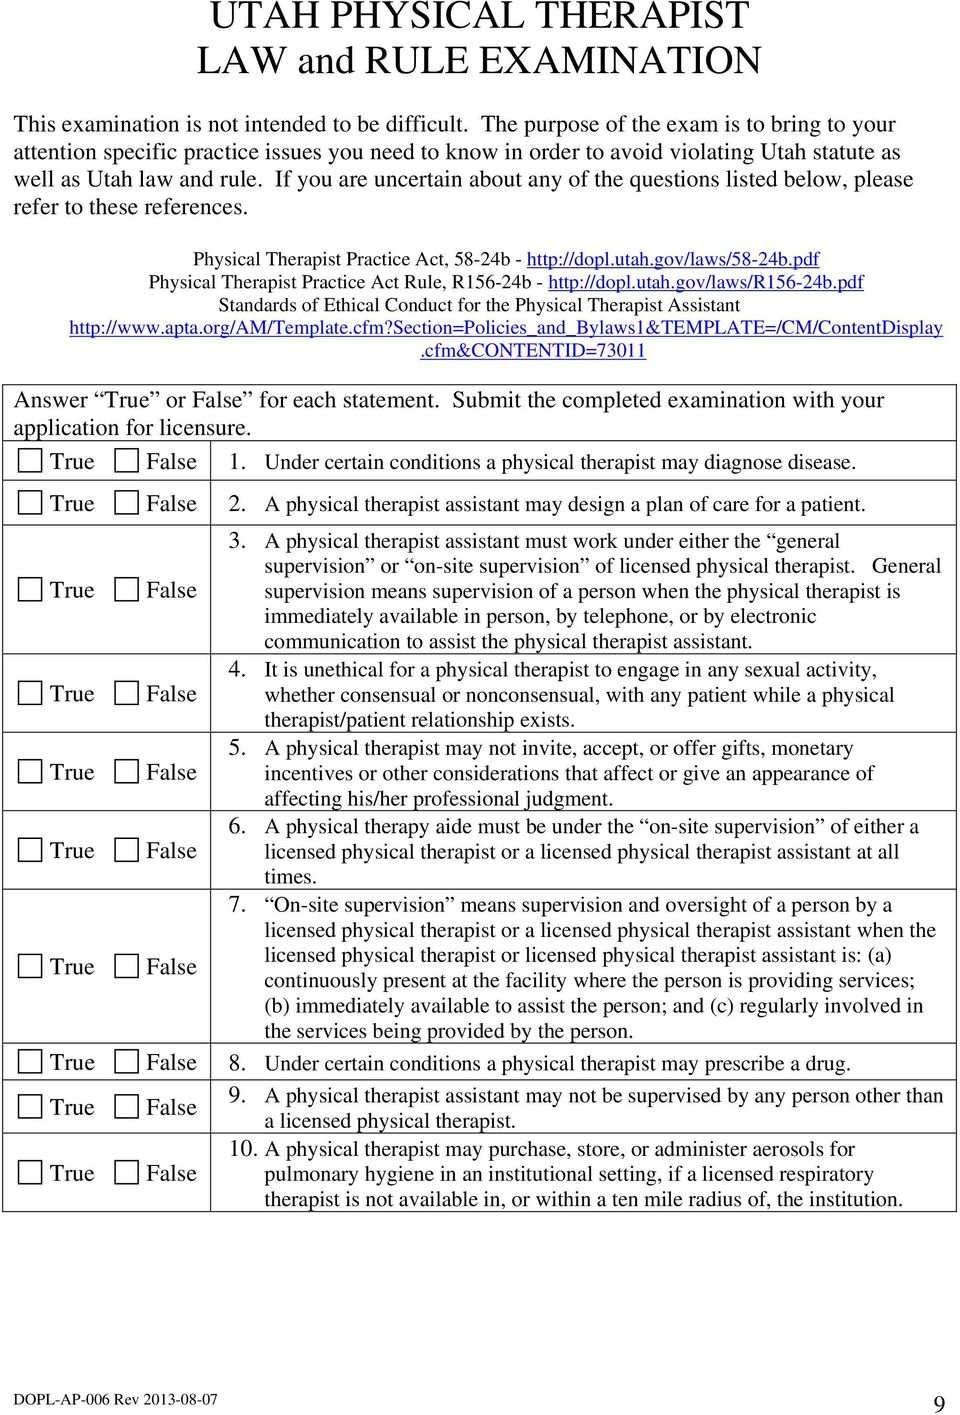 If you are uncertain about any of the questions listed below, please refer to these references. Physical Therapist Practice Act, 58-24b - http://dopl.utah.gov/laws/58-24b.